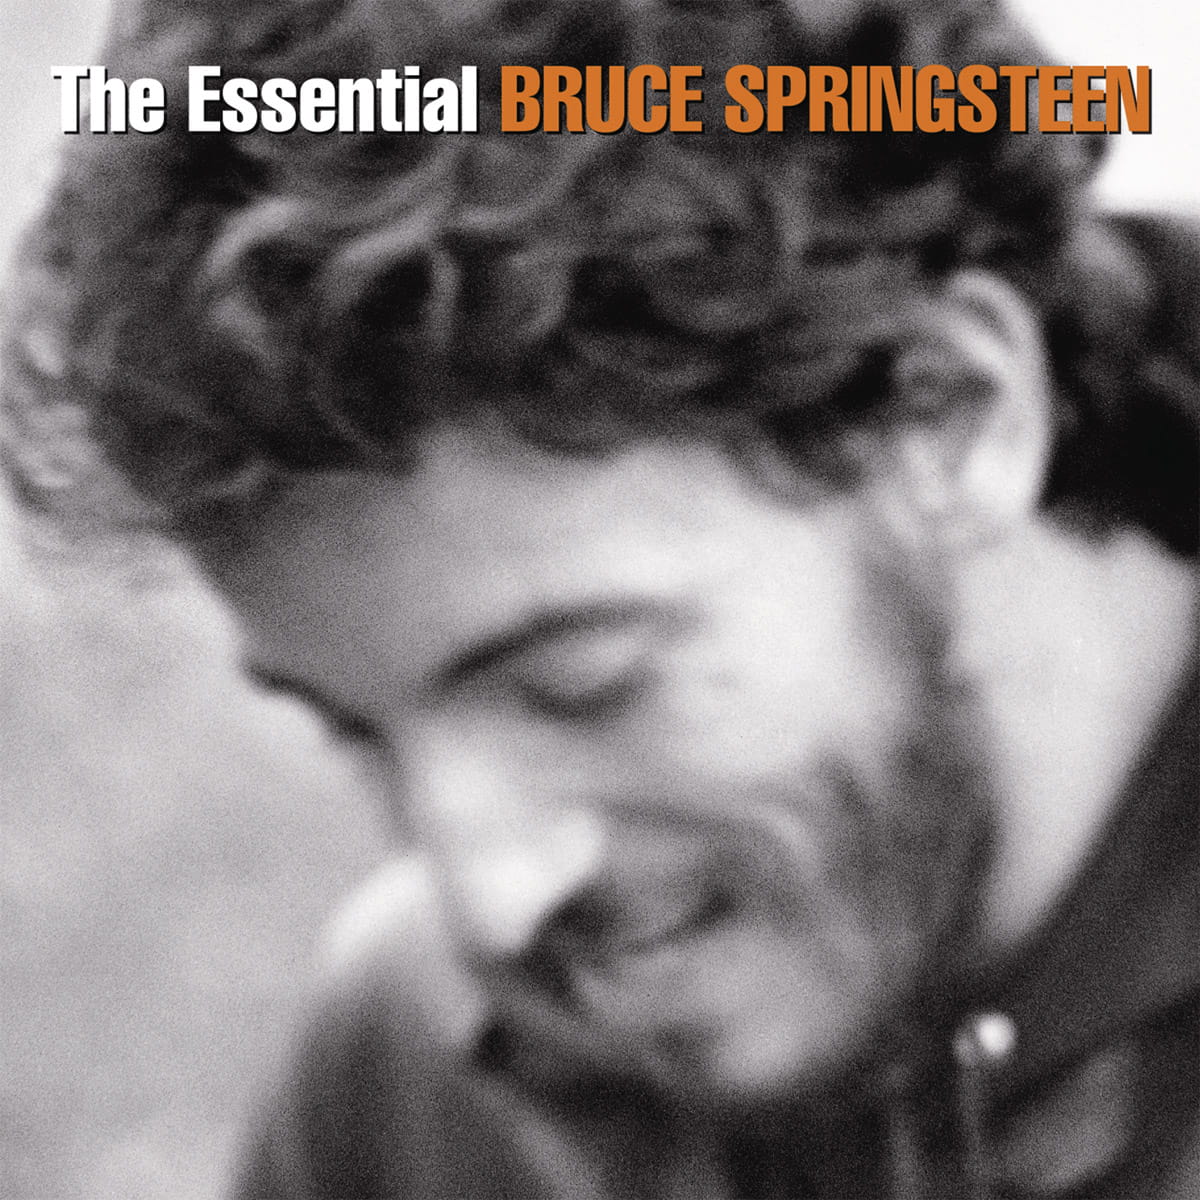 Bruce Springsteen The Essential Bruce Springsteen front cover